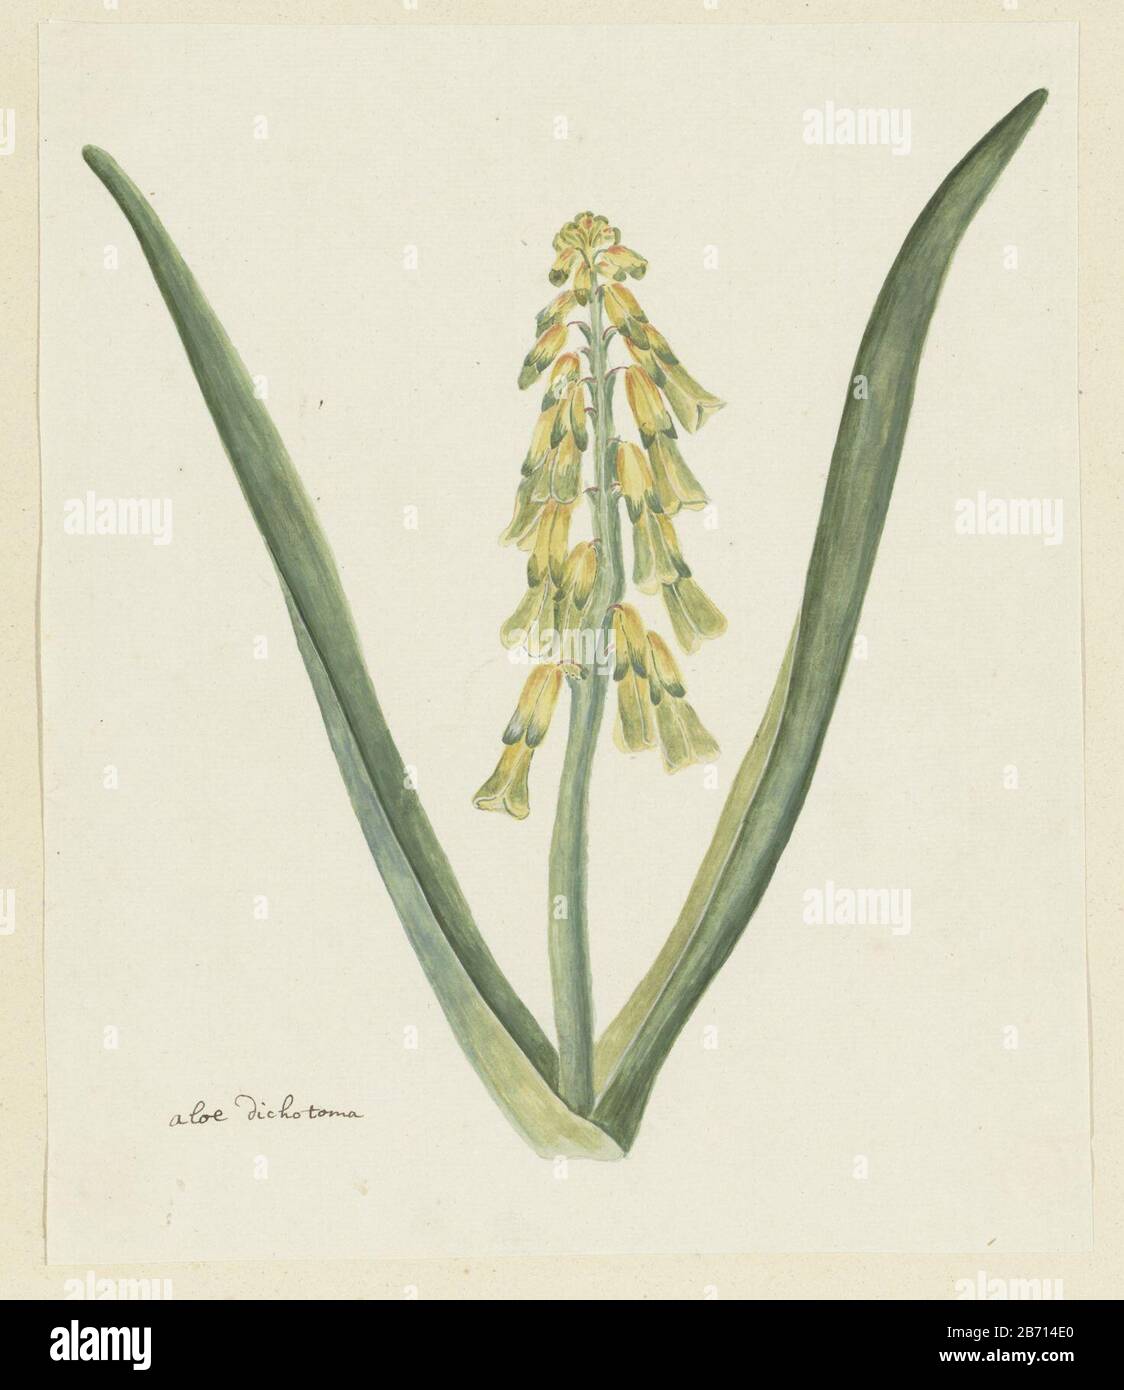 Lachenalia aloides (Lf) Engl aloe dichotoma (titel op object) Lachenalia aloides (Lf) Engl.aloe dichotoma (title object) Object Type: drawing album leaf Object number: RP-T-1914-18-78 Inscriptions / Brands: annotation, lower left, pen and Brown, 'Aloe dichotoma (Gordon's handwriting) Description: Lachenalia aloides (Lf) Engl. Manufacturer : artist: Robert Jacob Gordon Date: Oct 1777 - mar-1786 Physical features: brush in watercolor in colors, brush in body color, pencil and black chalk, pen and ink material : paper finishing paint ink pencil crayons watercolor technique: pen / brush size: albu Stock Photo